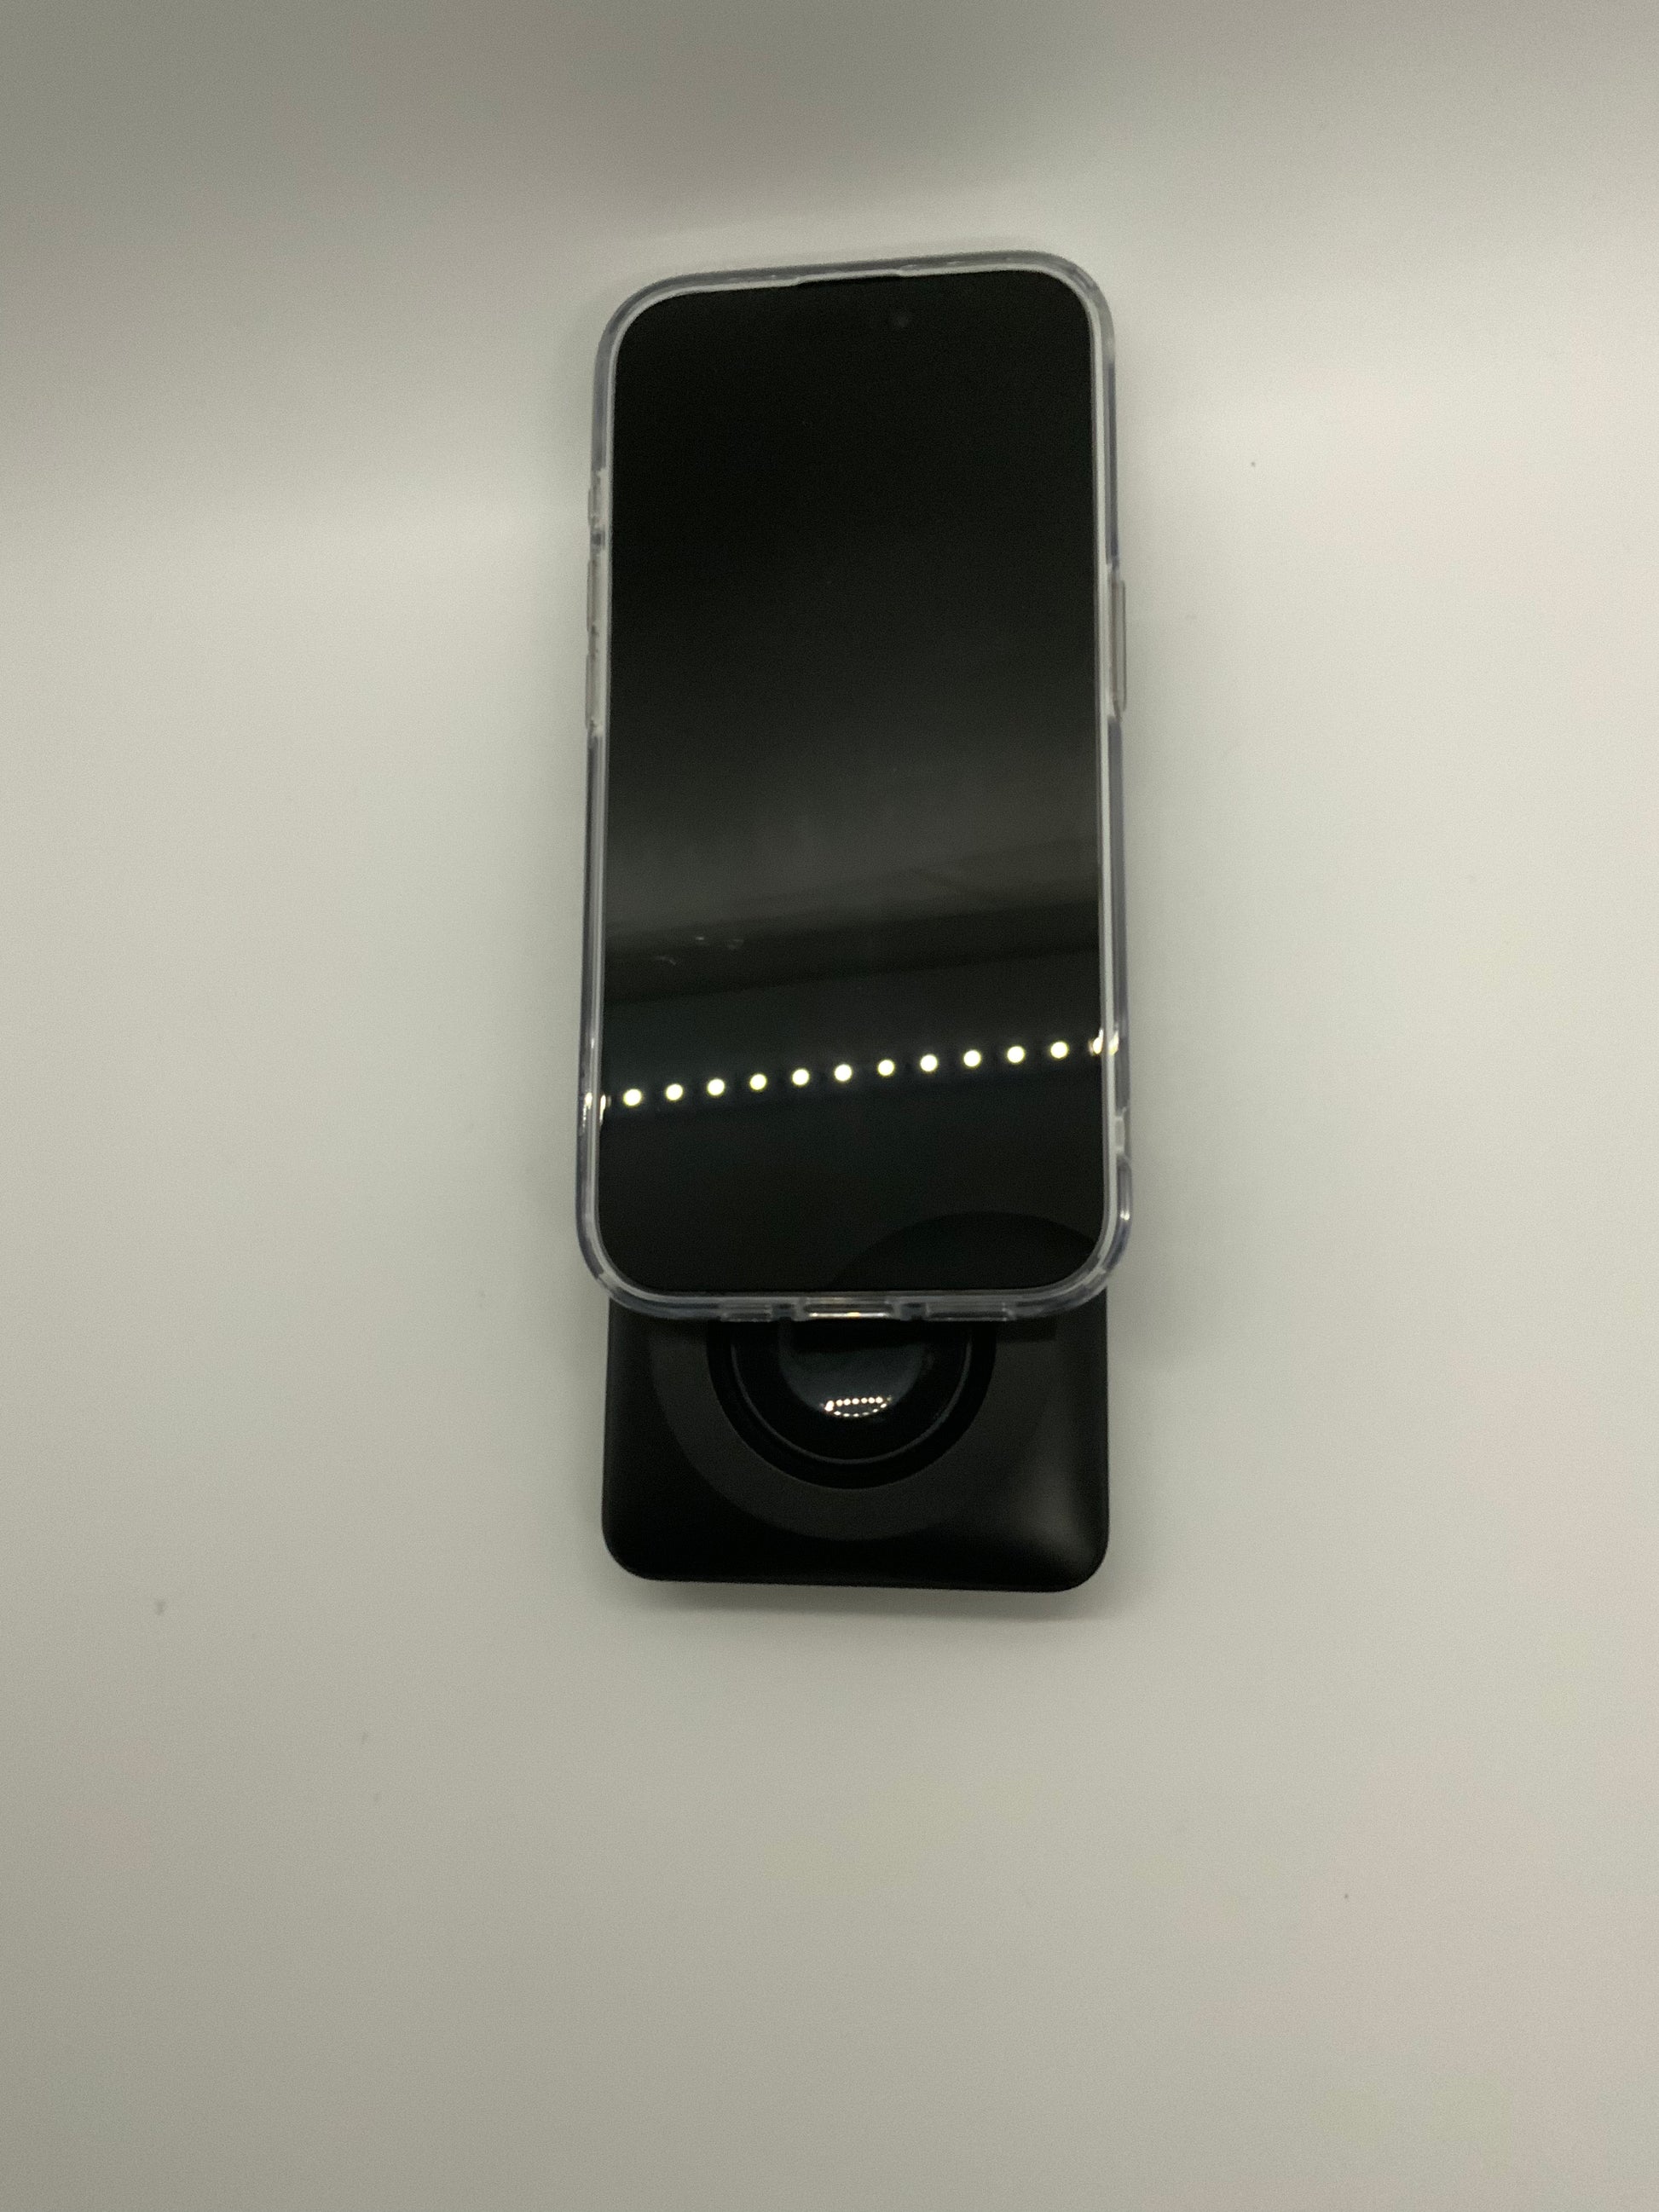 The picture shows a smartphone placed on a stand. The smartphone has a black screen and is in a vertical position. The stand is black and has a square base. The background is plain and light-colored. The phone is not turned on, so nothing is displayed on the screen.